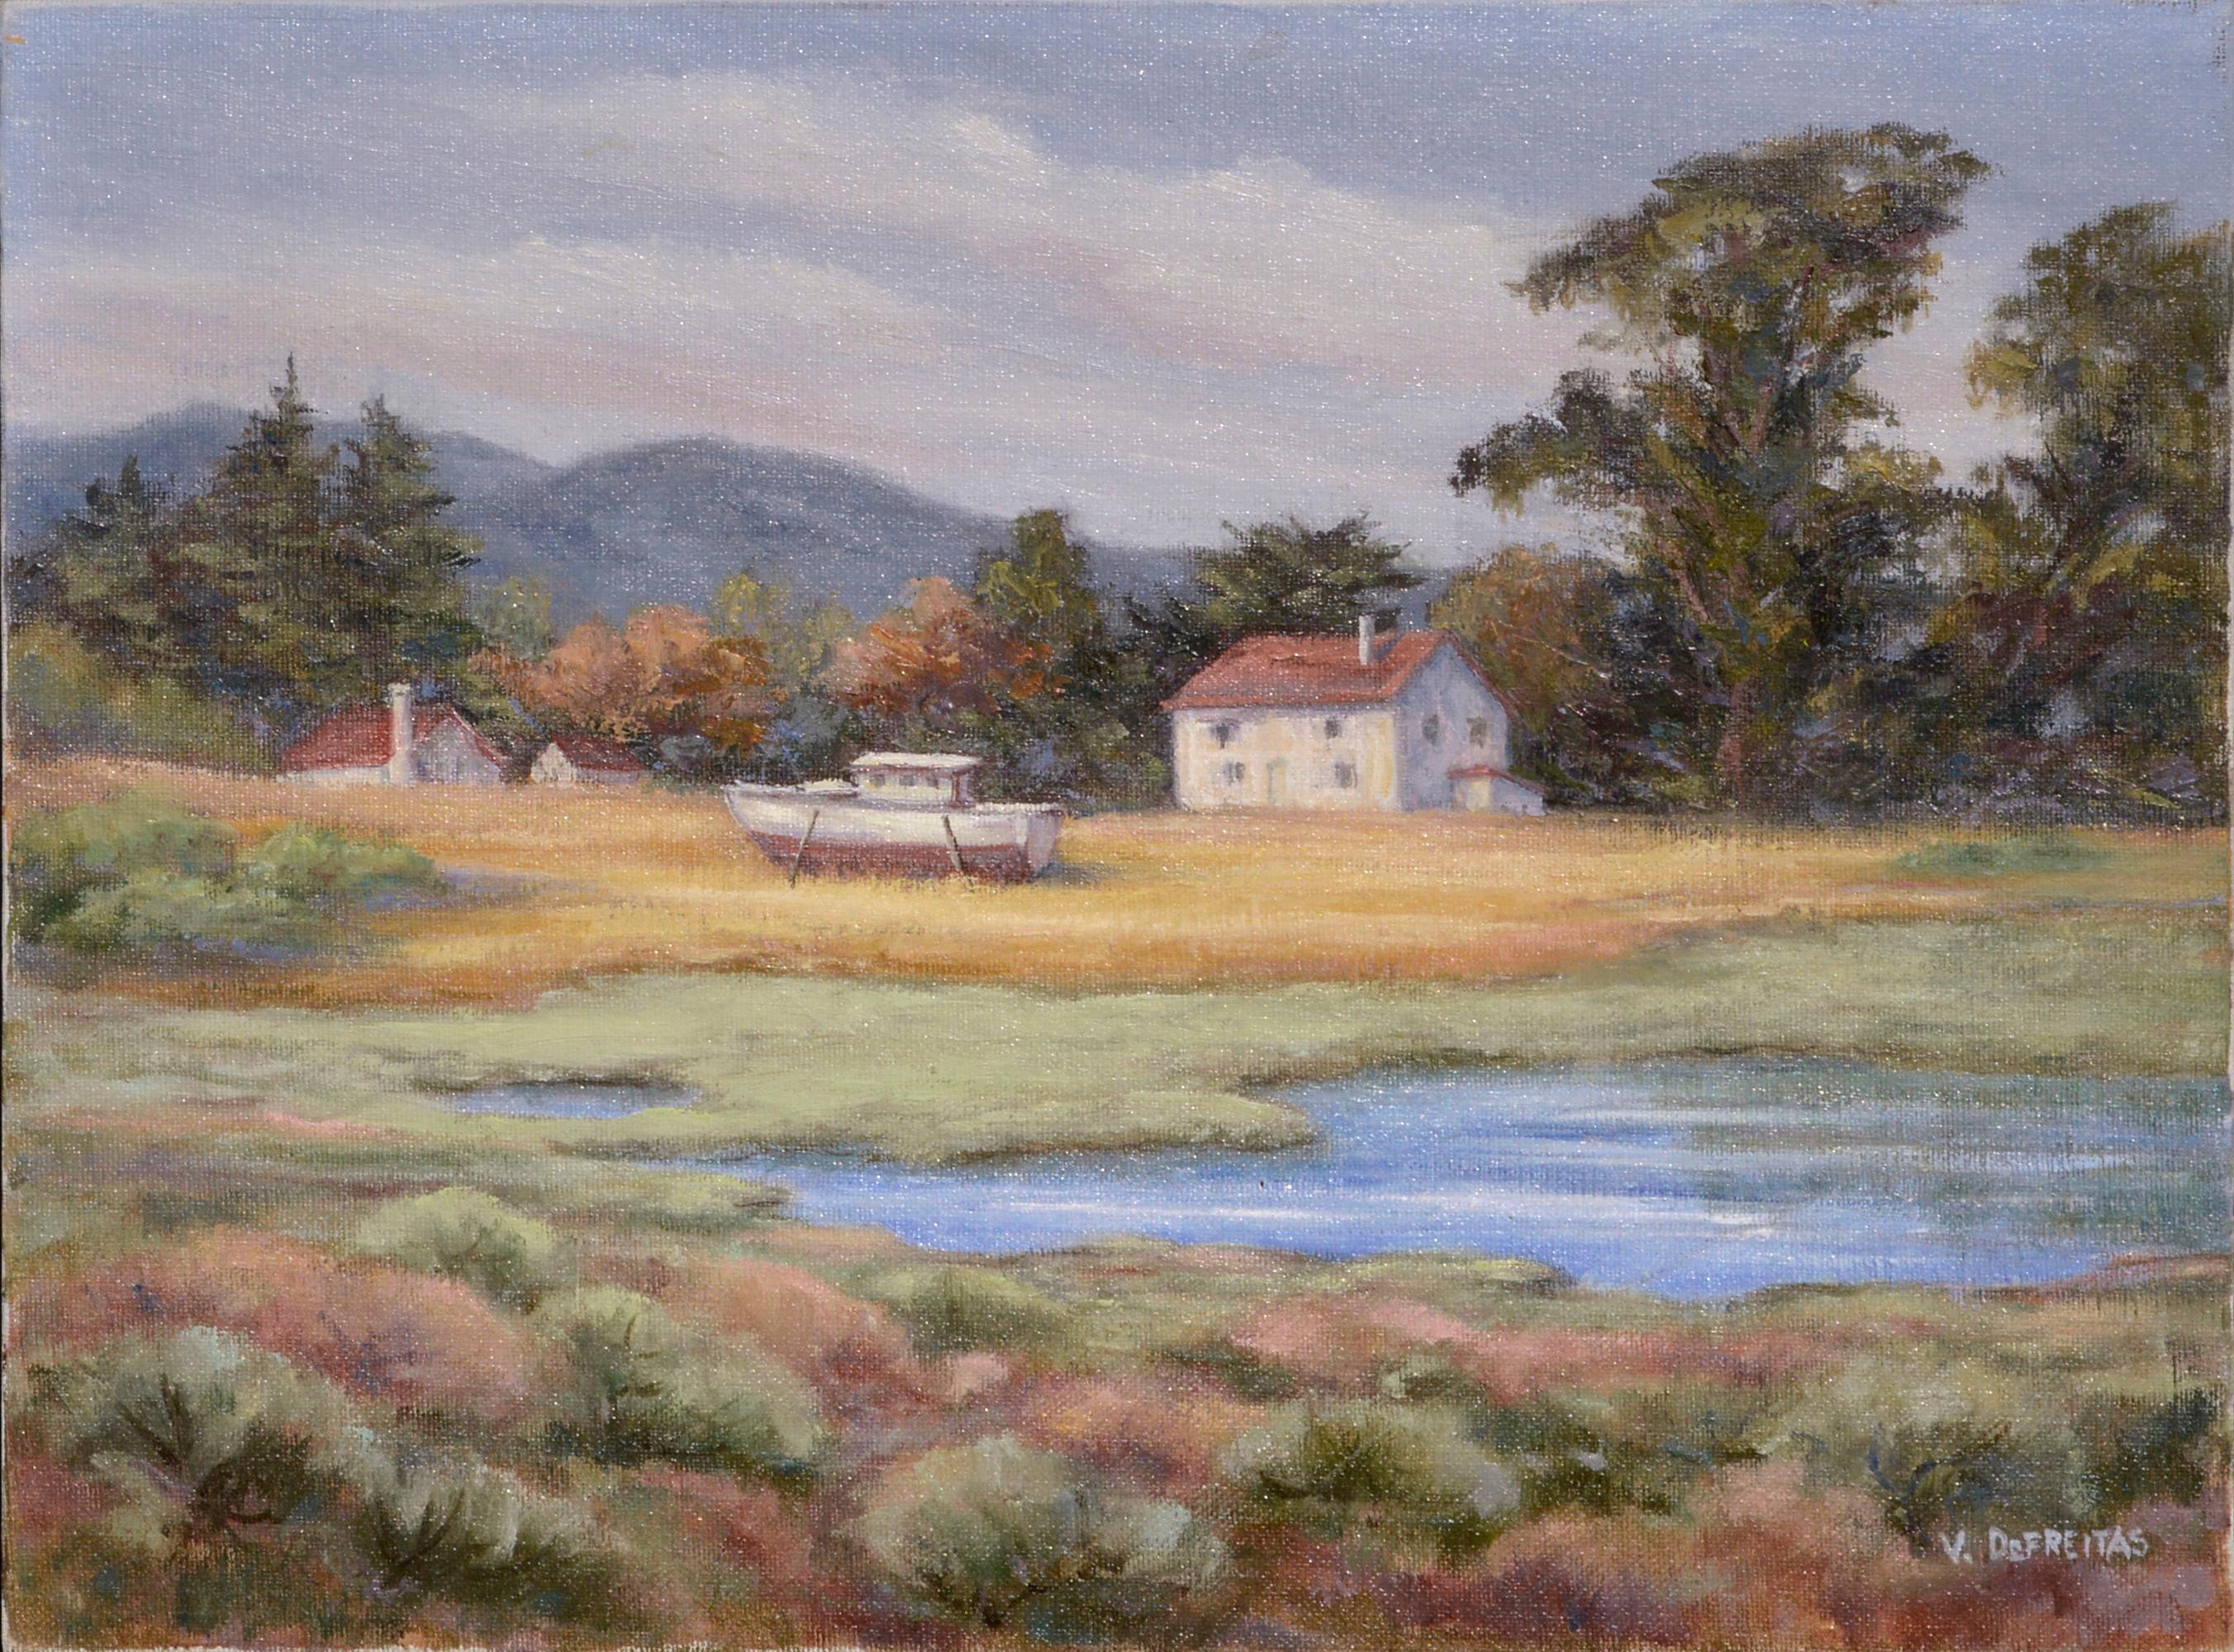 Virginia DeFreitas Landscape Painting - House and Boat by the Pond - Landscape